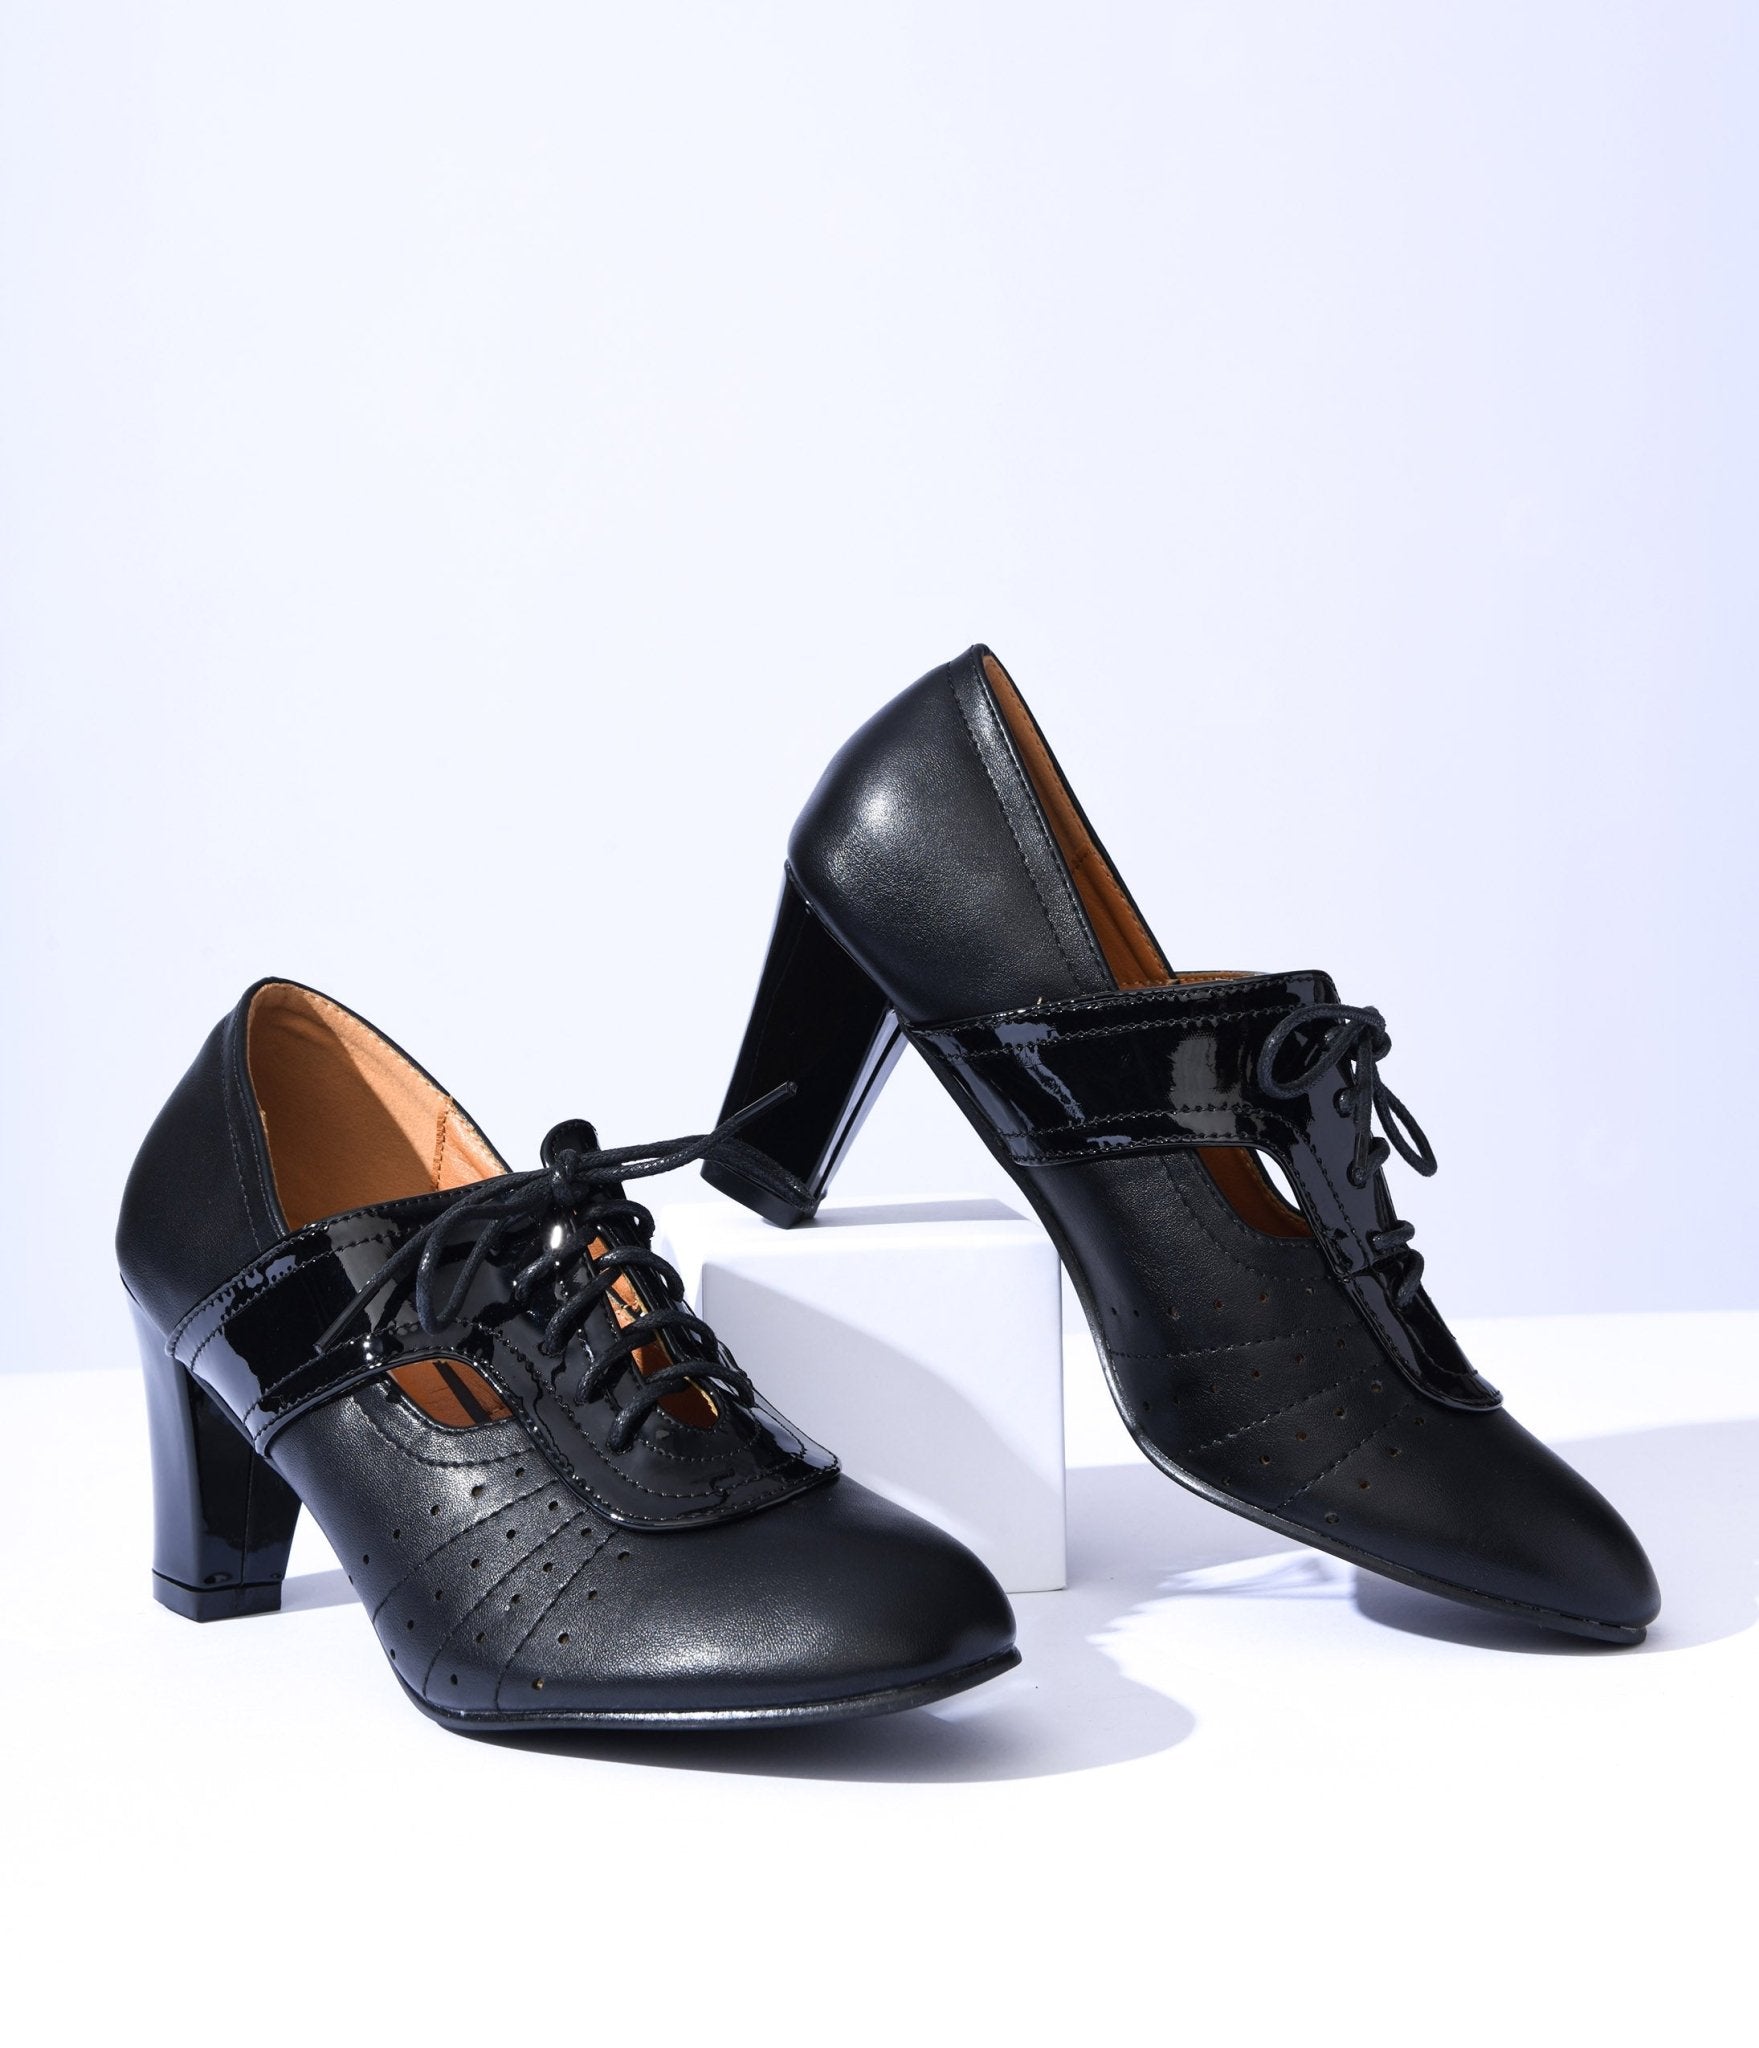 Buy Fulham Oxford Pumps, Womens Oxfords, Leather Shoes, Bordeaux Shoes, Heeled  Oxfords, Oxford Heels, Handmade Shoes, FREE Customization Online in India -  Etsy